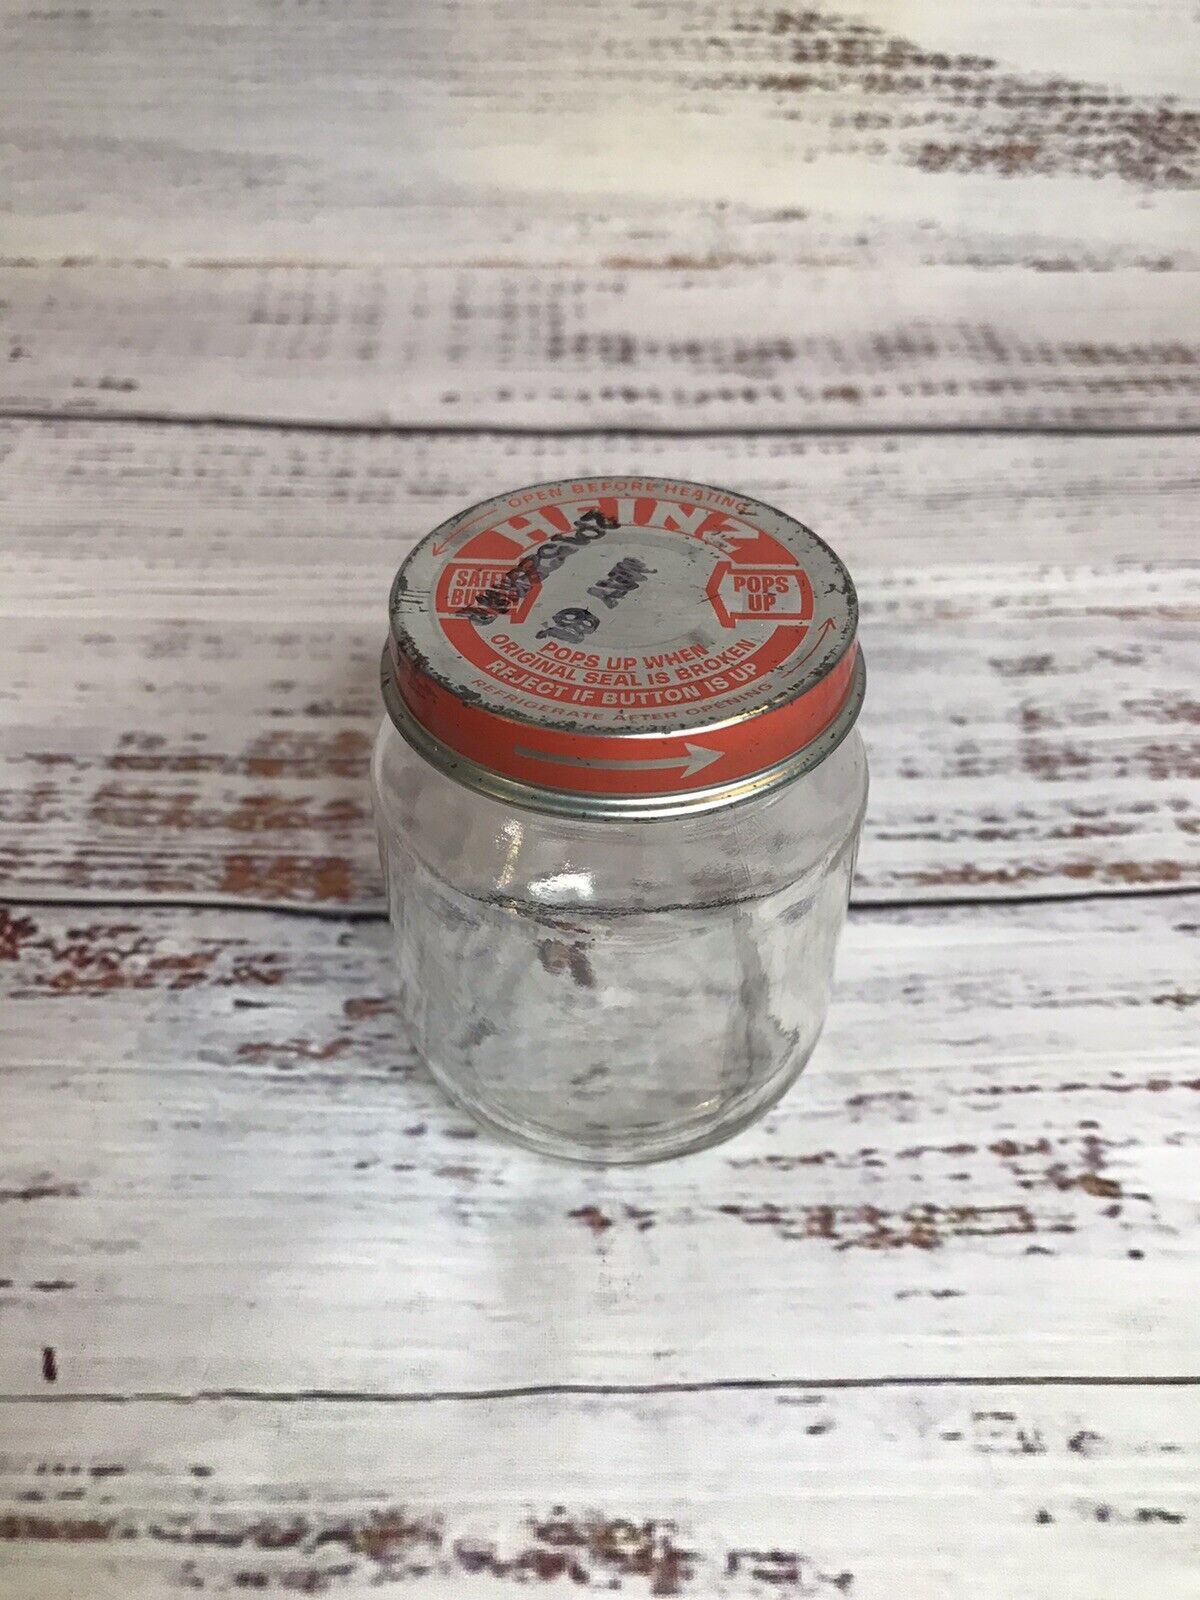 1 Small HEINZ Ketchup Jar 1960s Pop Up Safety Button Lid Condiment